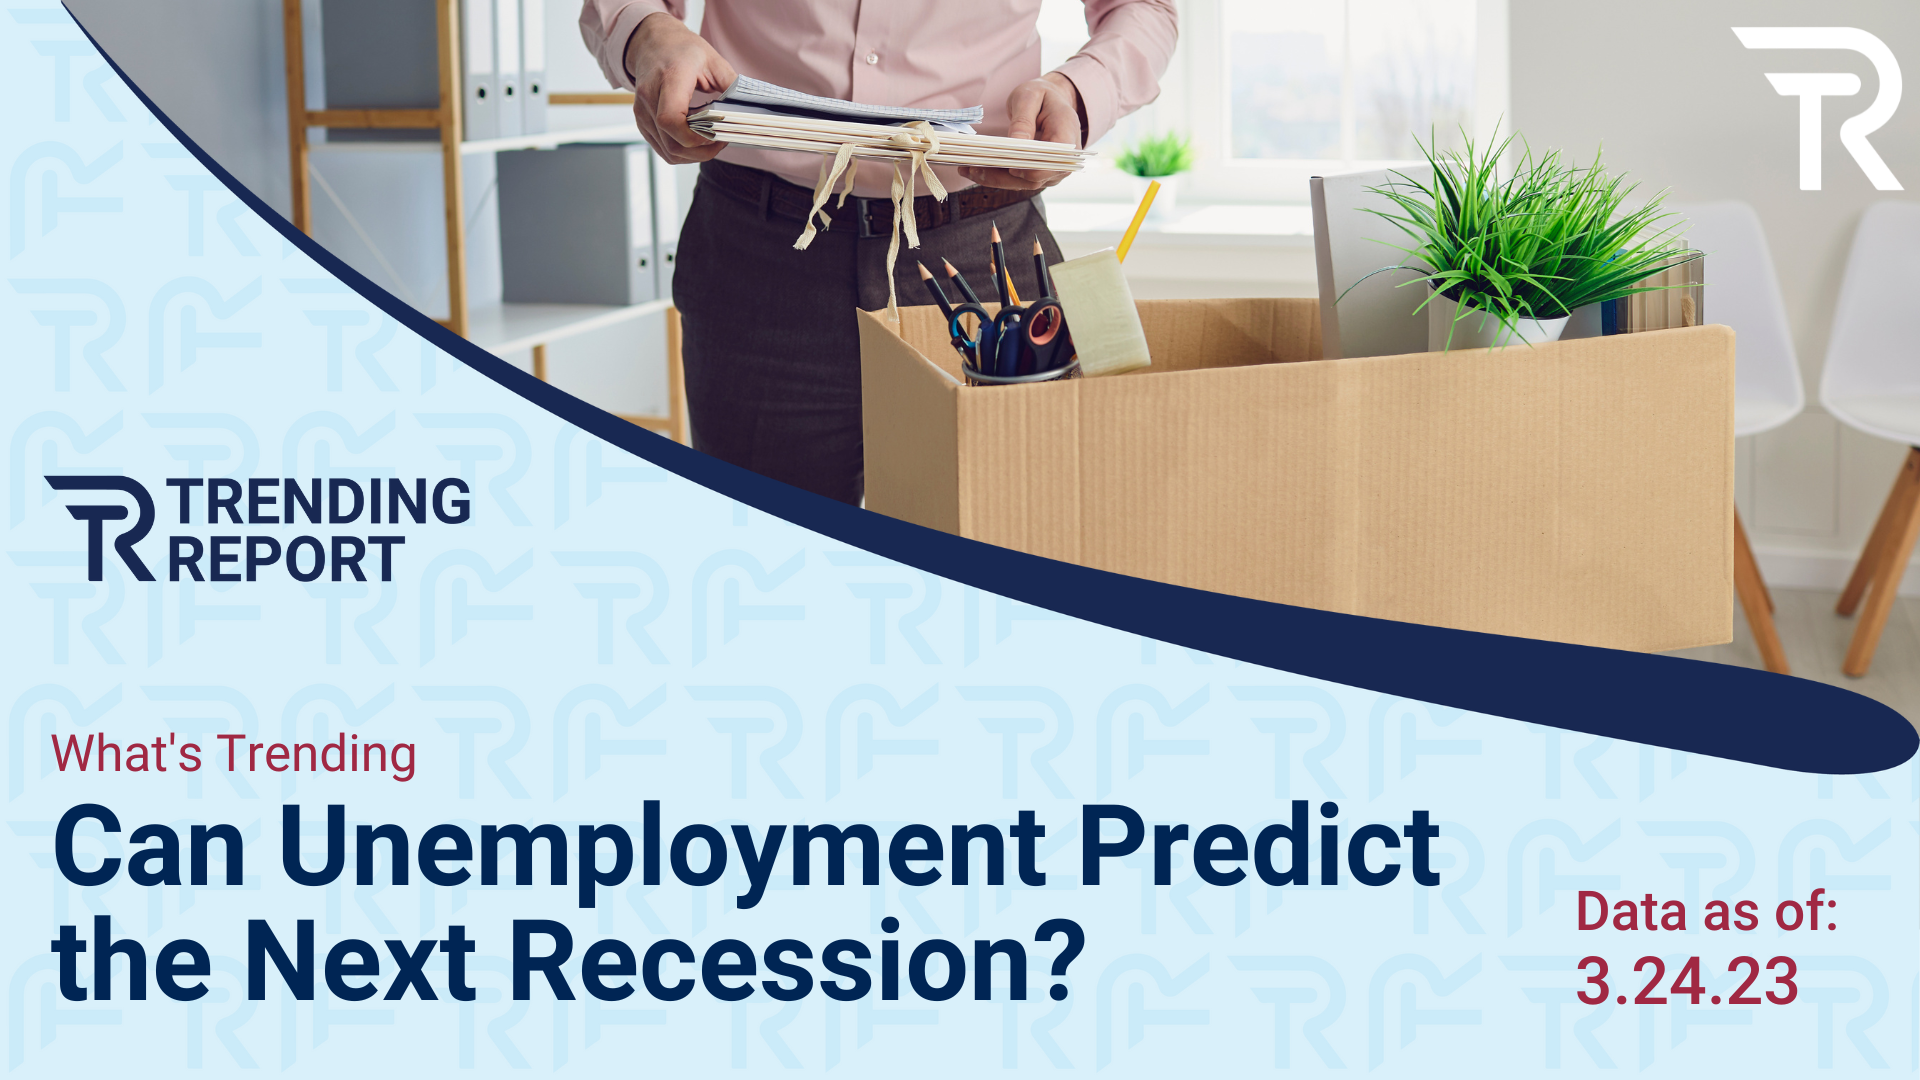 What's Trending: Can Unemployment Predict the Next Recession?